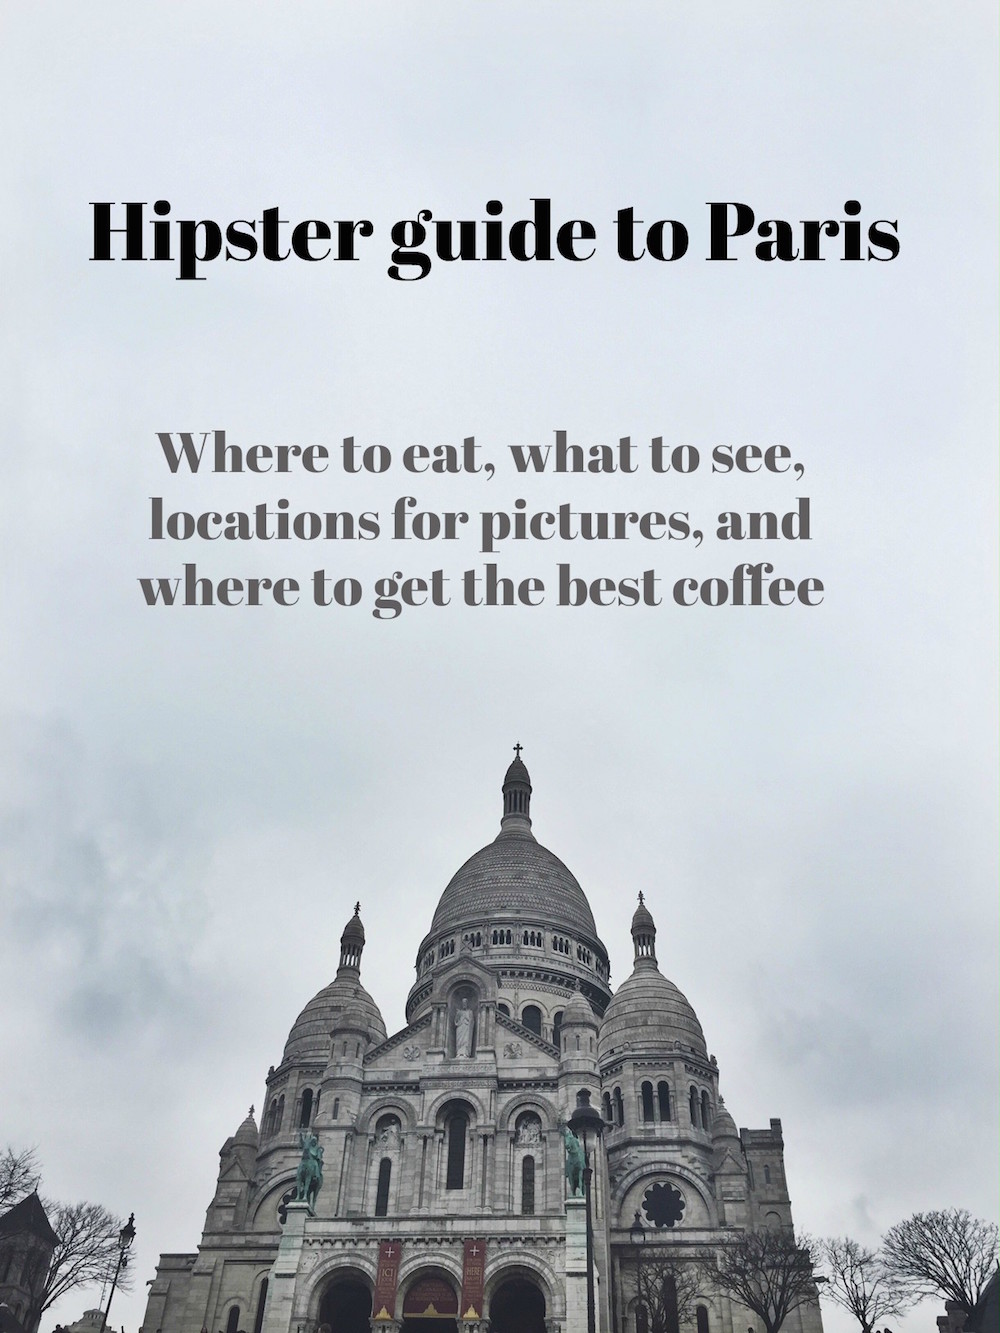 Hipster guide to Paris